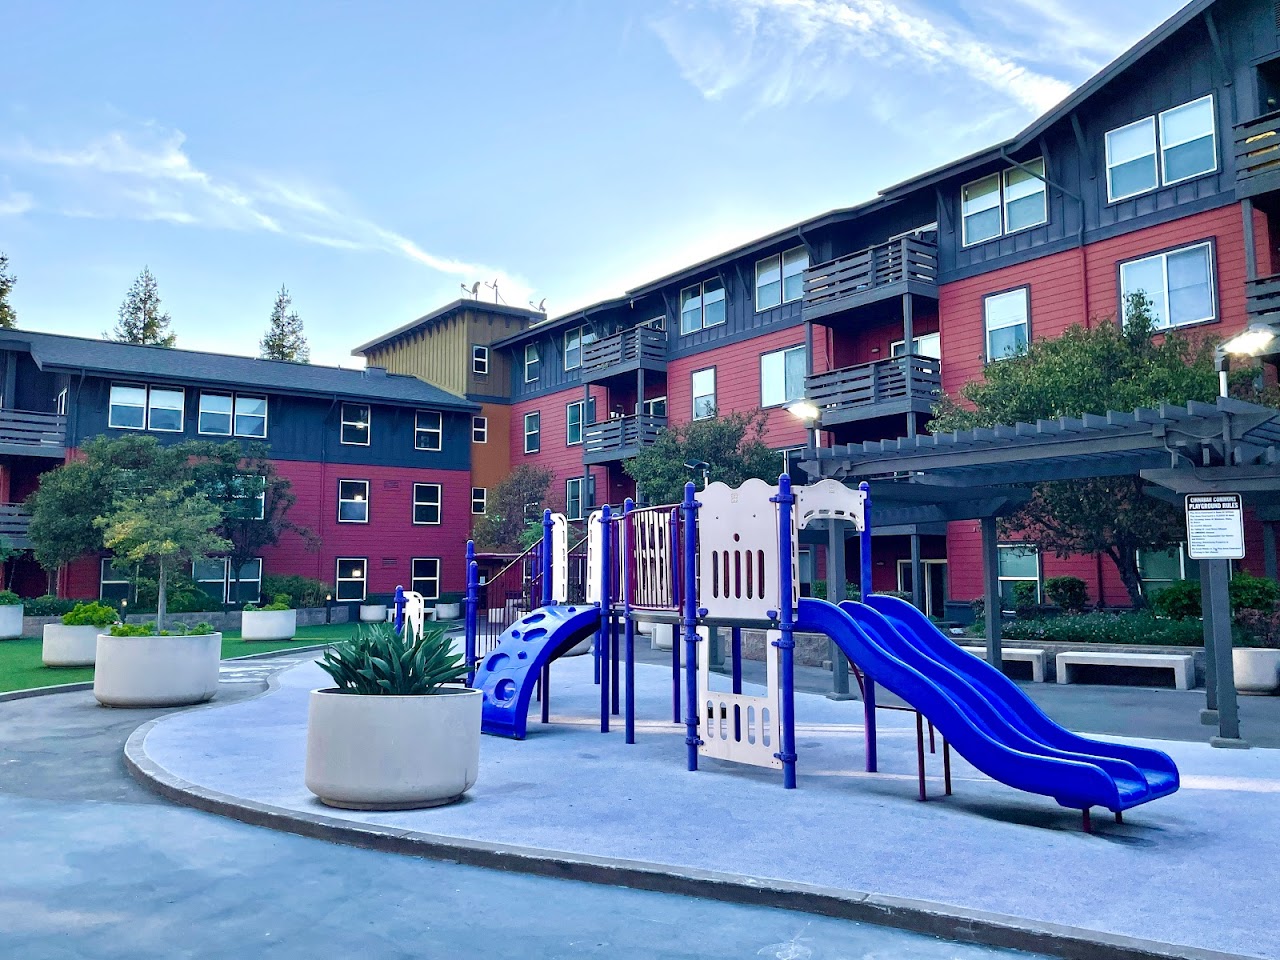 Photo of CINNABAR COMMONS. Affordable housing located at 875 CINNABAR ST SAN JOSE, CA 95126